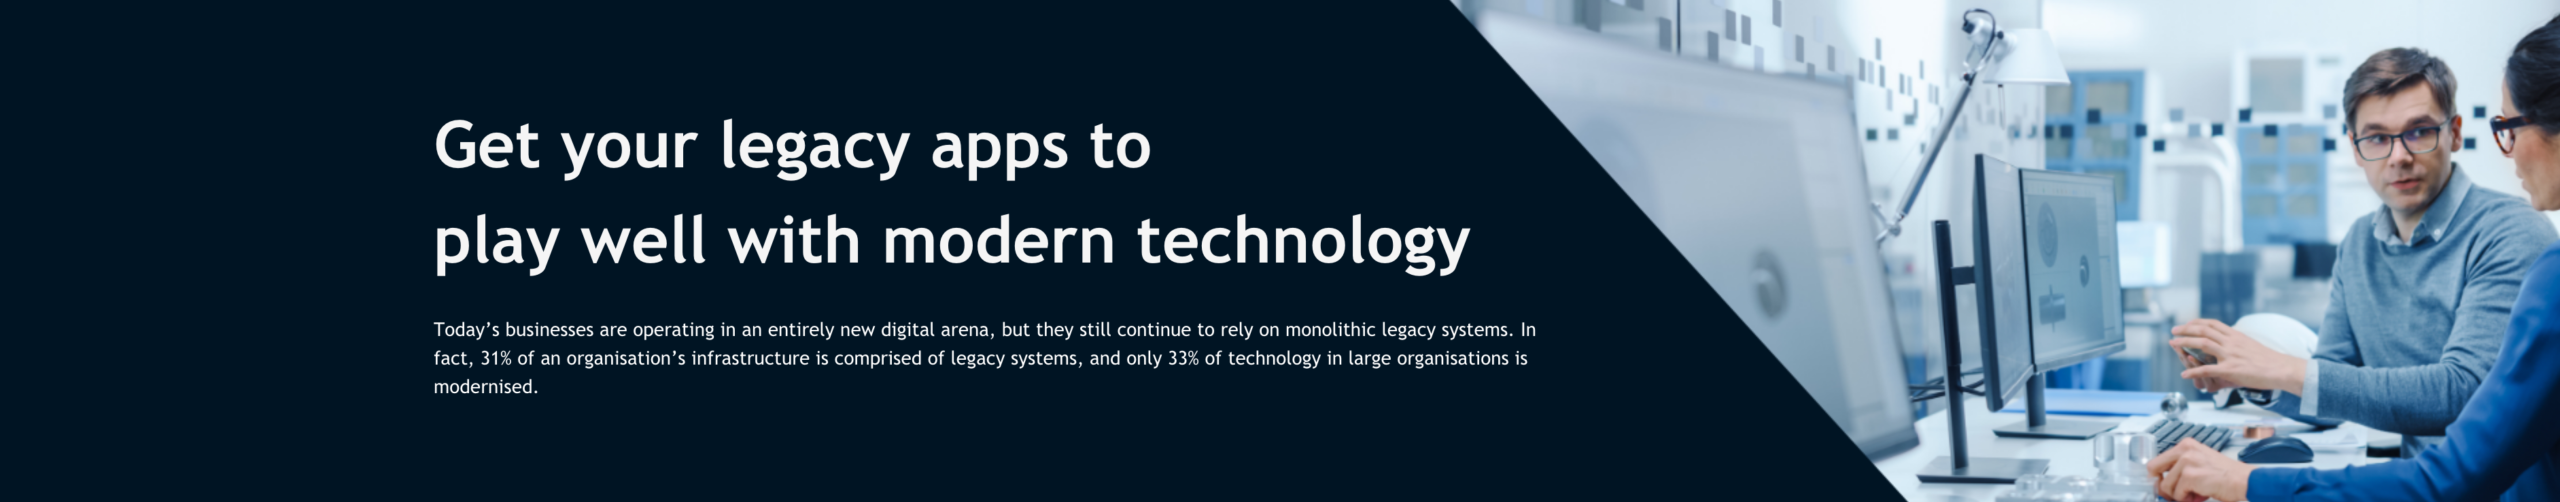 Get your legacy apps to play well with modern technology Banner Image